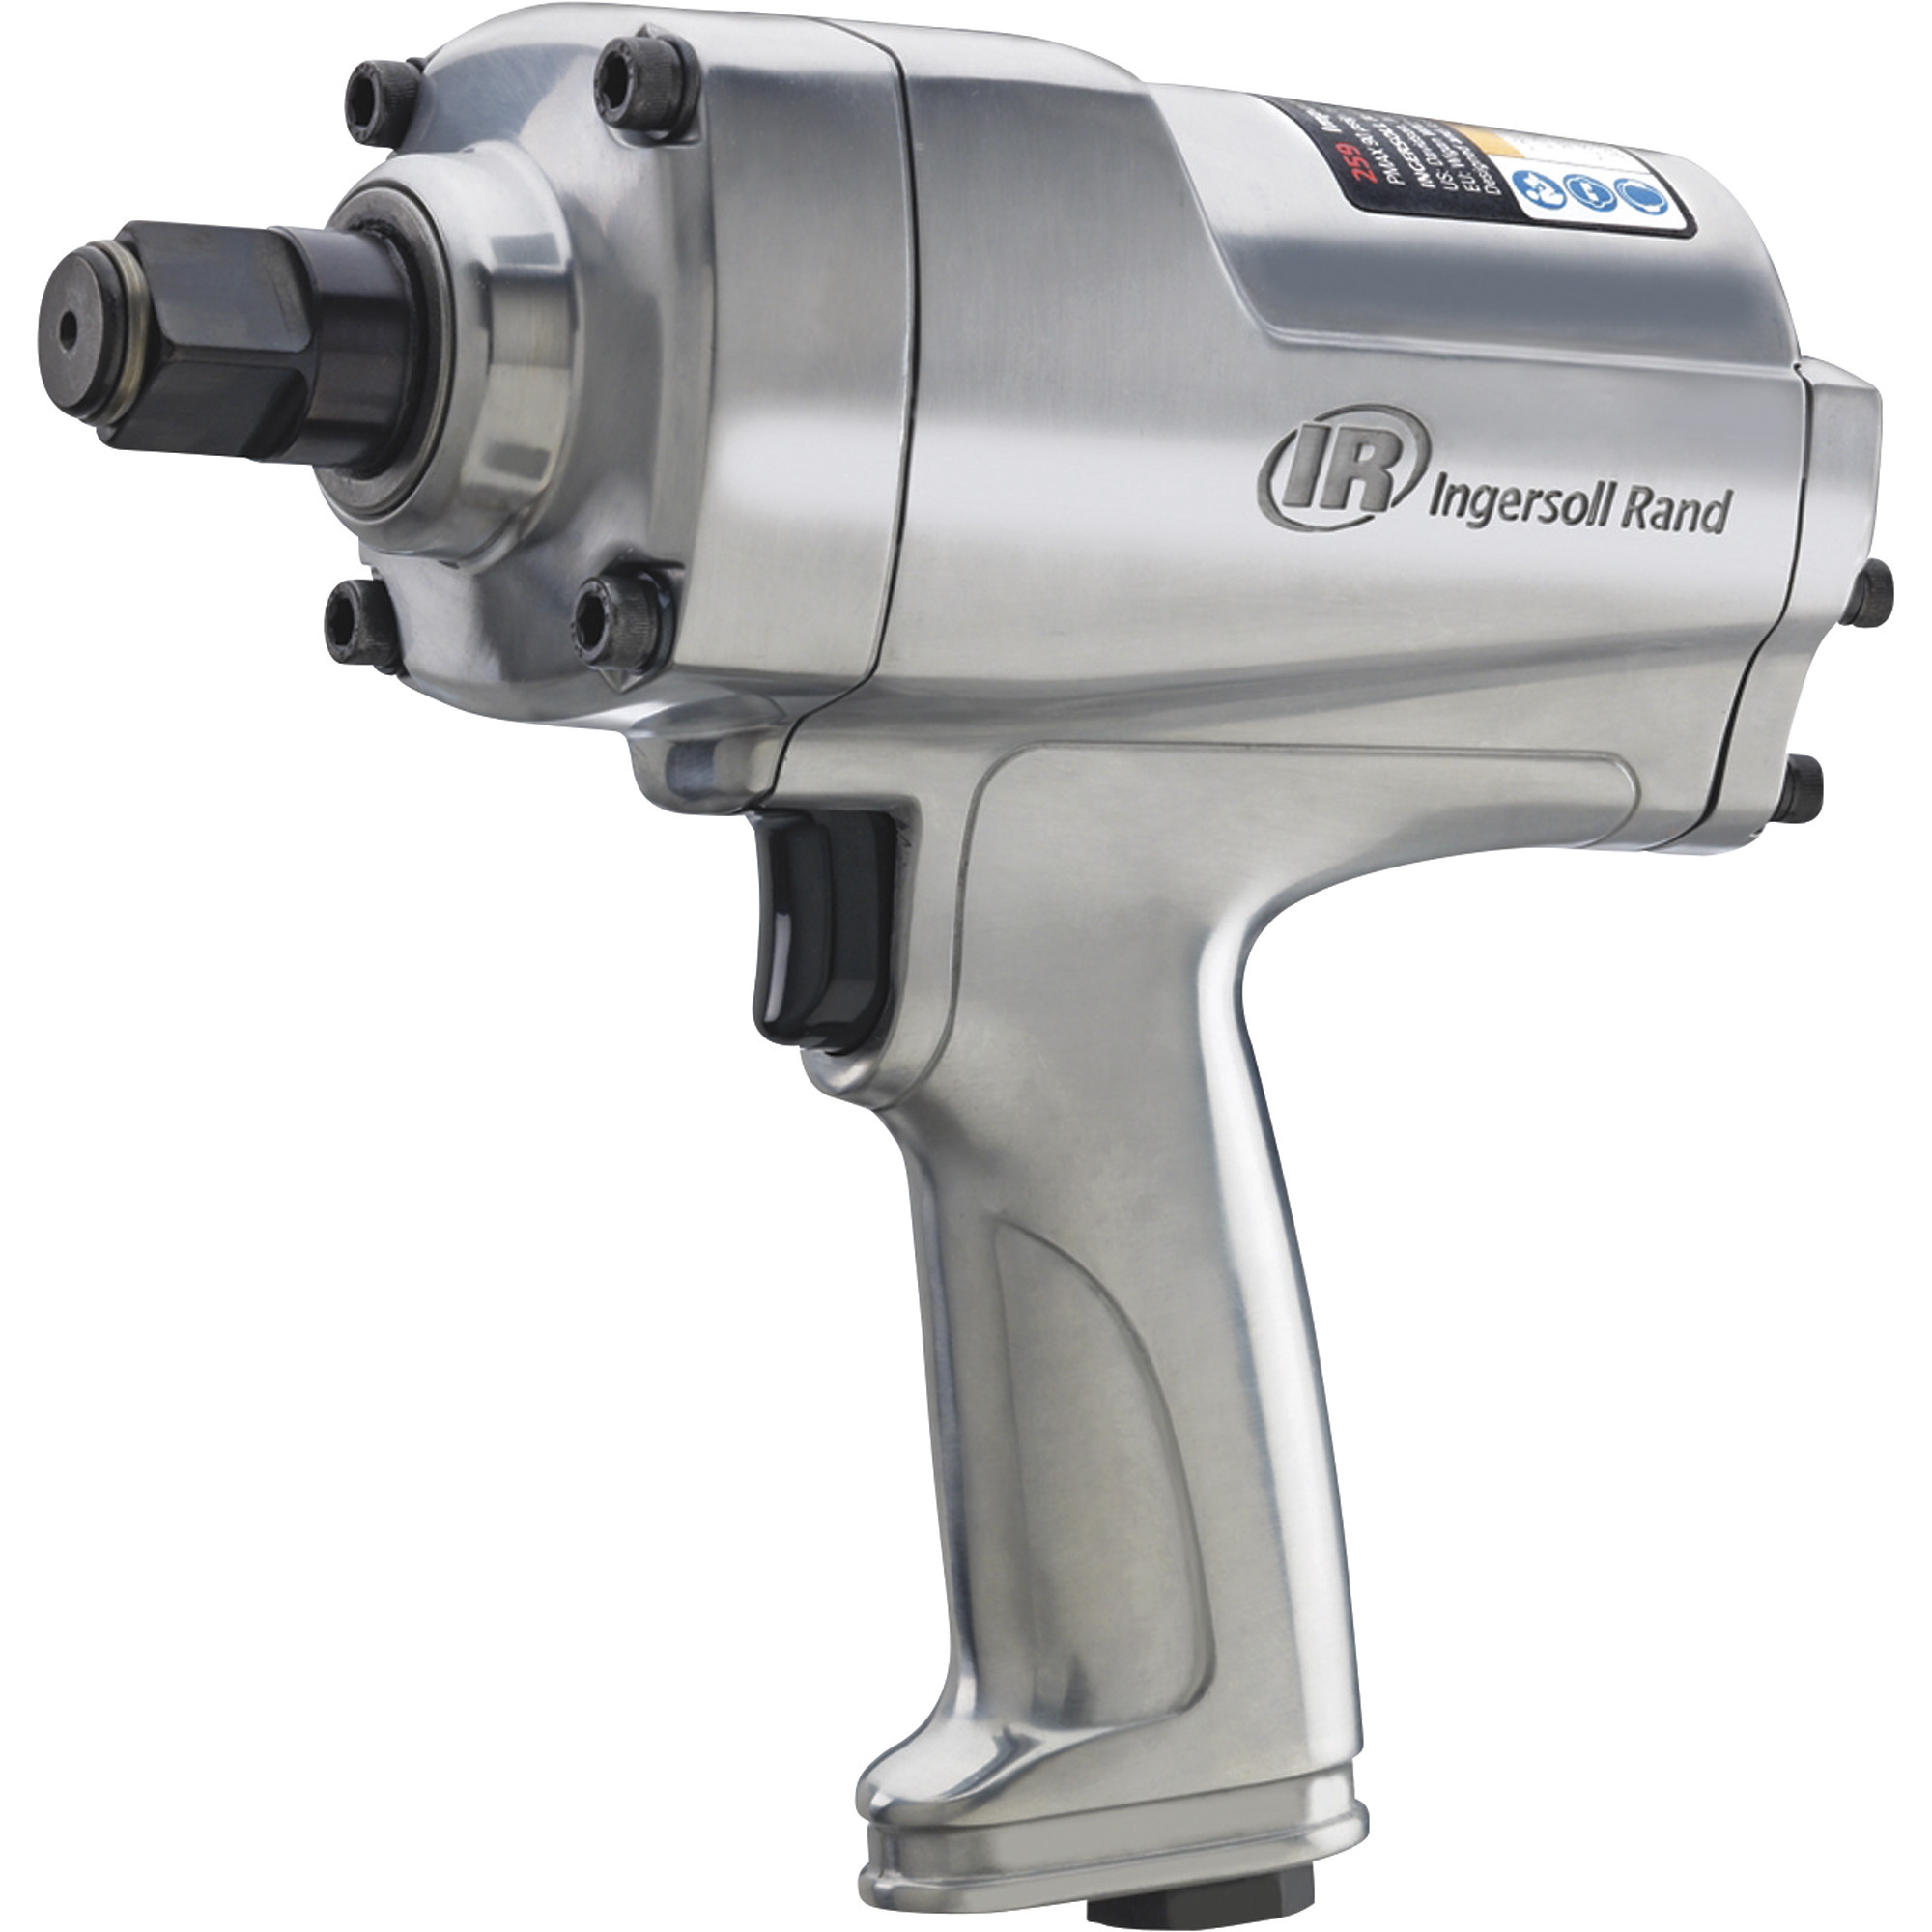 Ingersoll Rand Air Impact Wrench, 3/4Inch Drive, 8 CFM, 1050 Ft./Lbs. Torque, Model 259